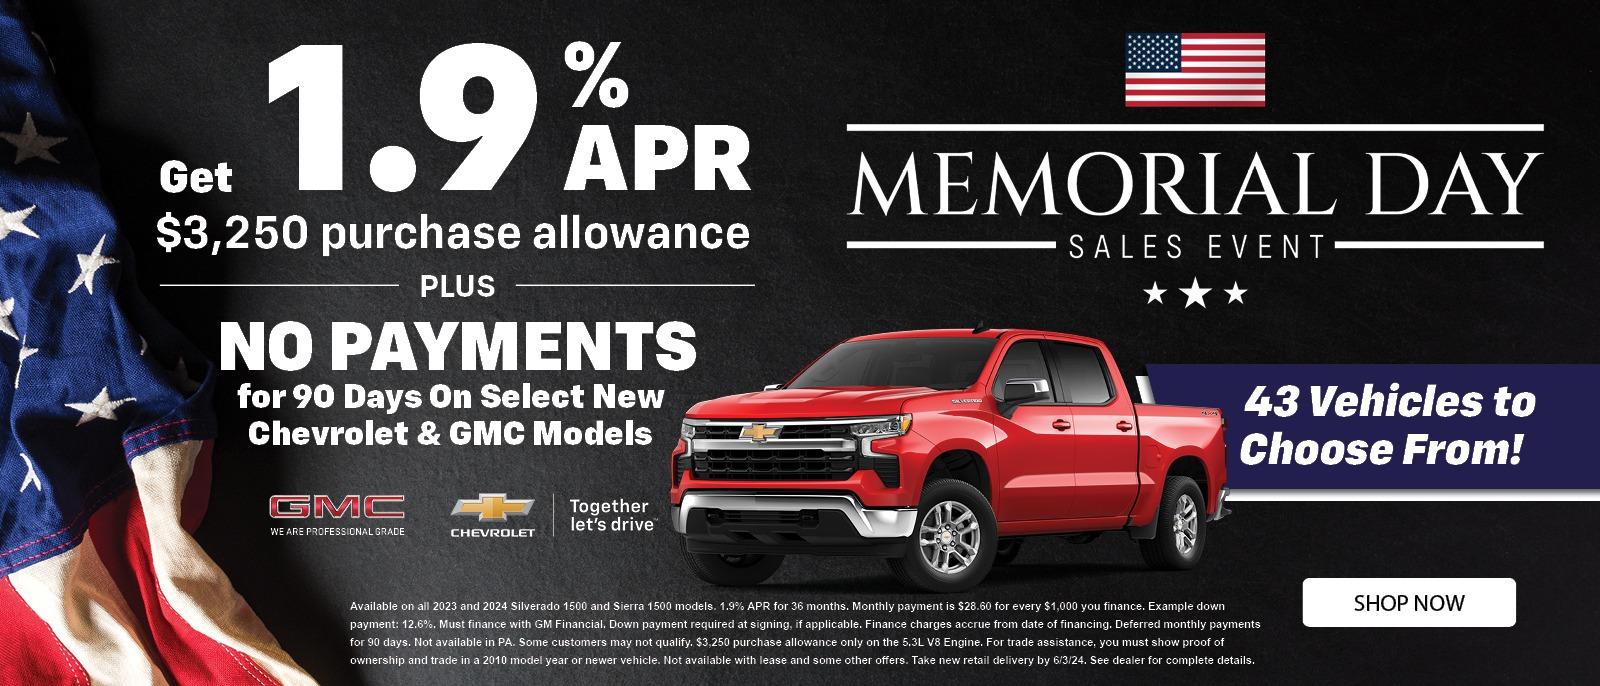 Get 1.9% APR
$3,250 Total Cash Allowance
Plus
No payments for 90 days on select new Chevrolet & GMC Models